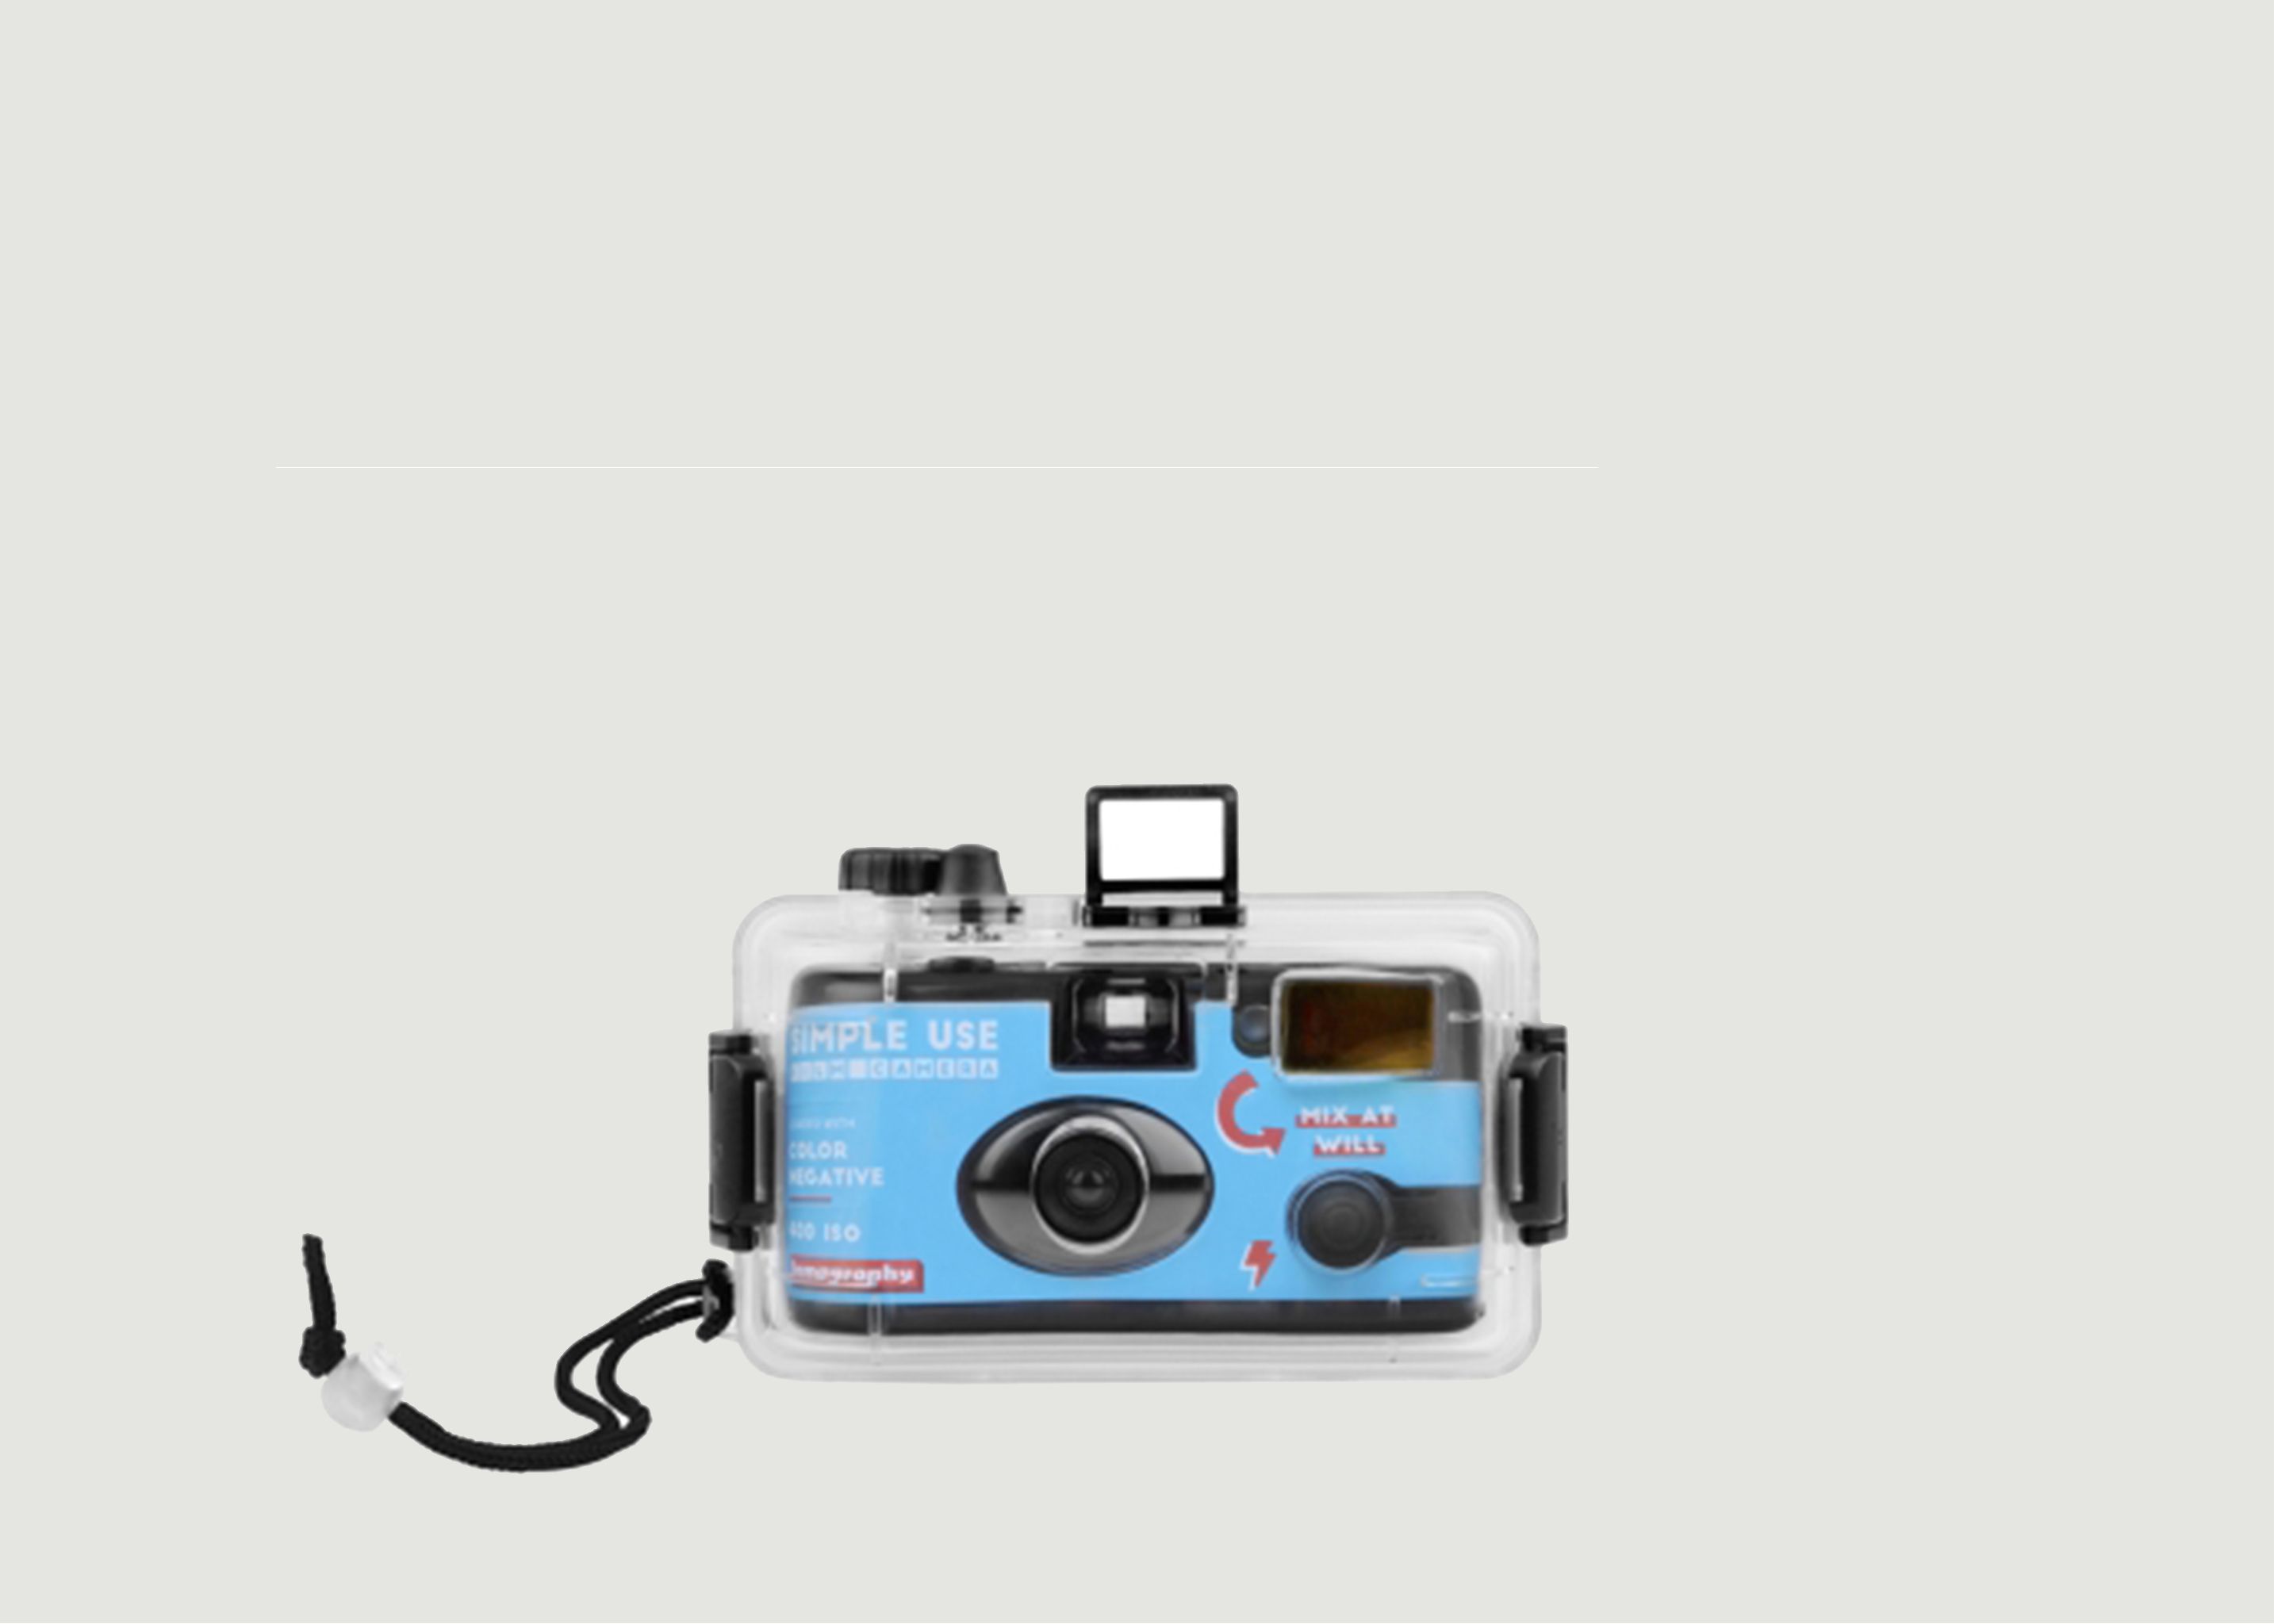 Simple Use Reloadable Camera & Underwater Case  - Lomography